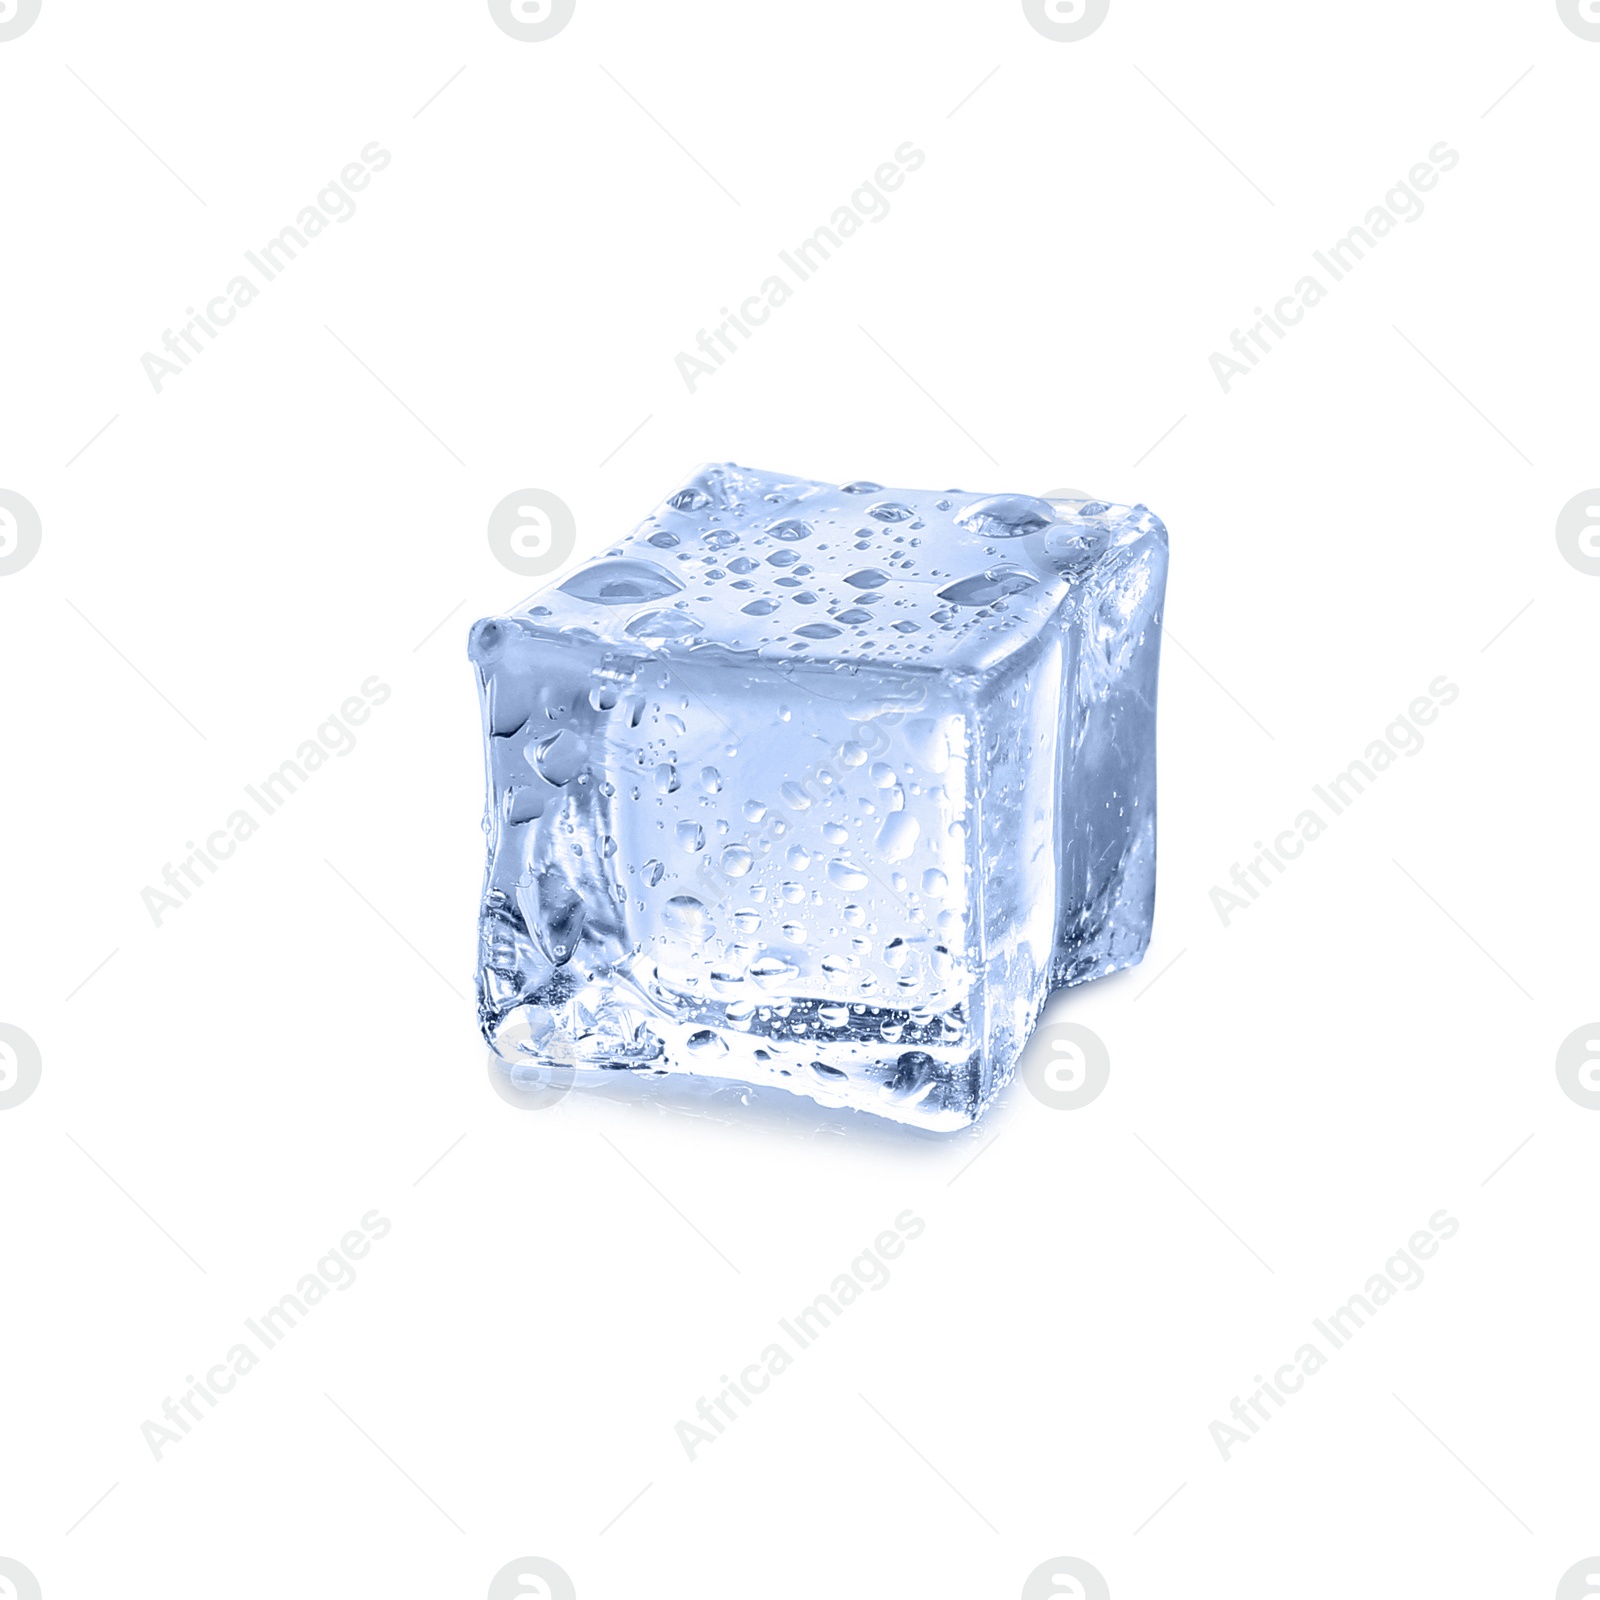 Photo of Crystal clear ice cube with water drops isolated on white